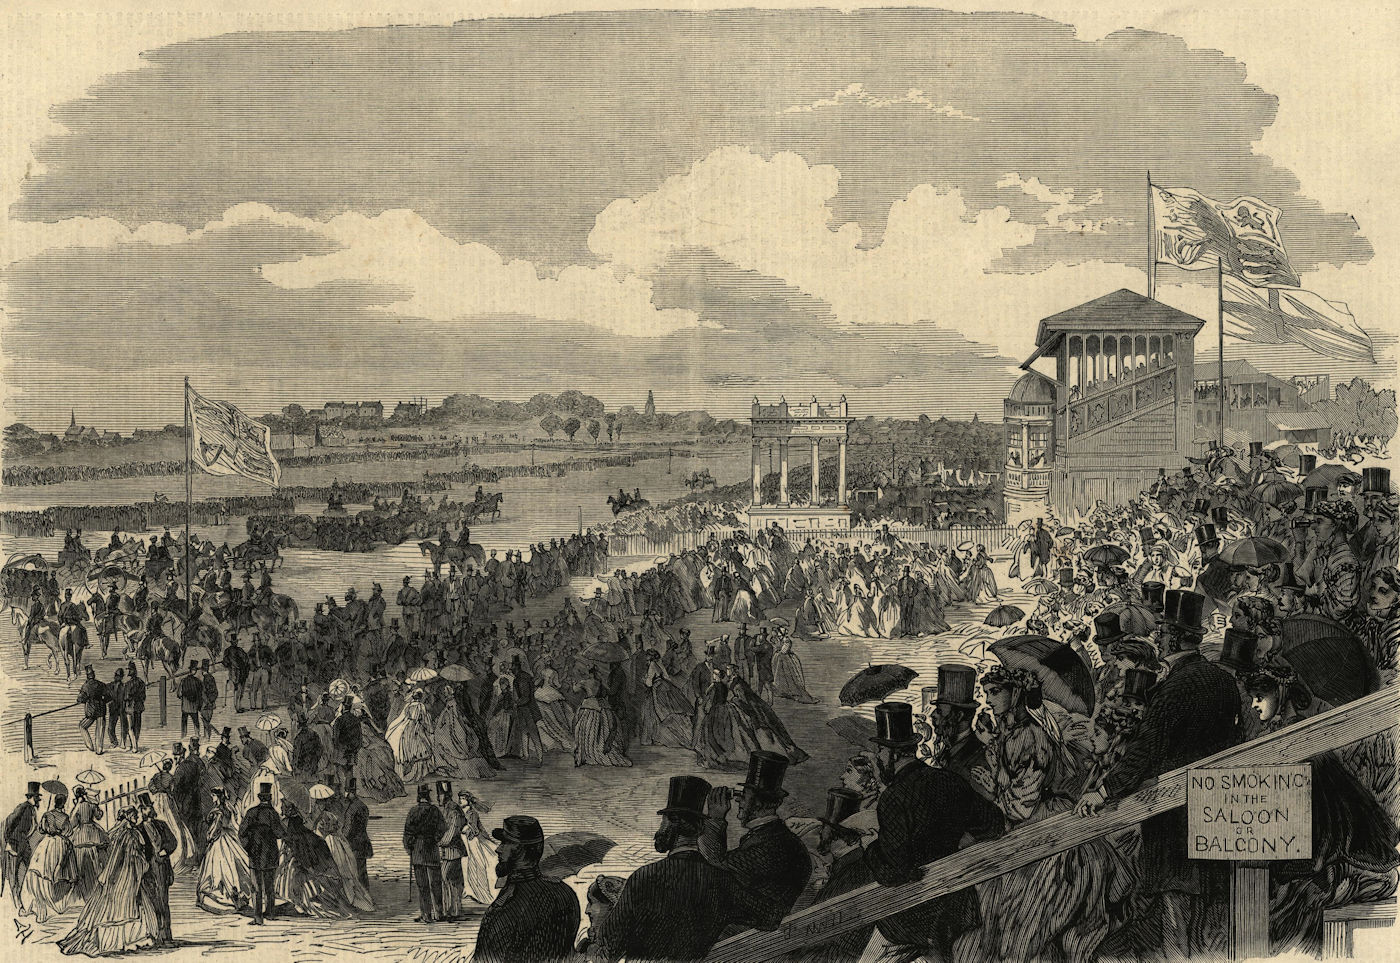 Associate Product Prince of Wales reviewing North of England Volunteers, York racecourse 1866